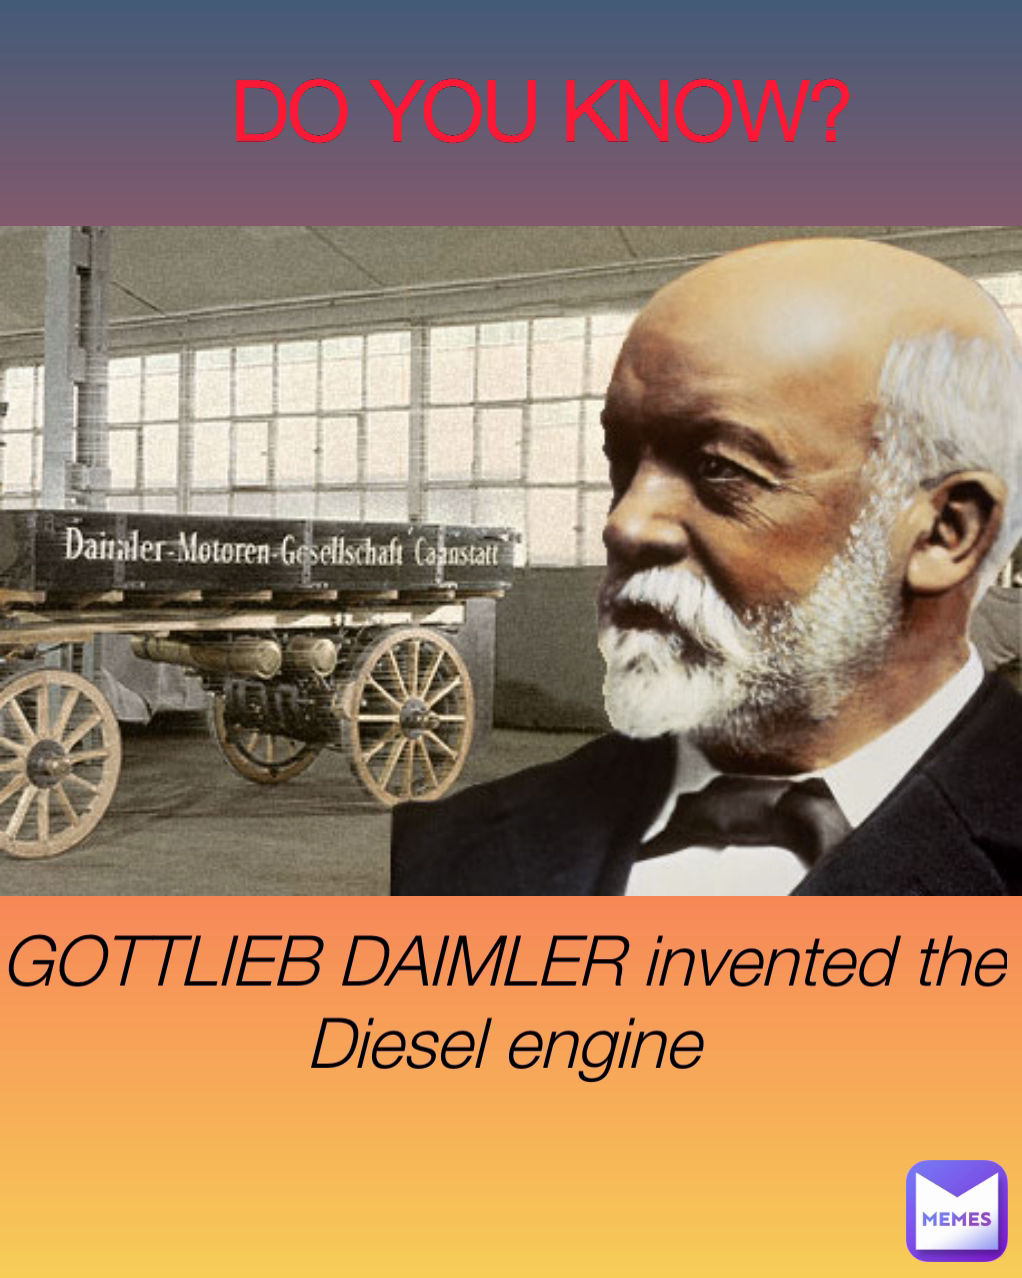 GOTTLIEB DAIMLER invented the Diesel engine DO YOU KNOW? | @gurutech | Memes